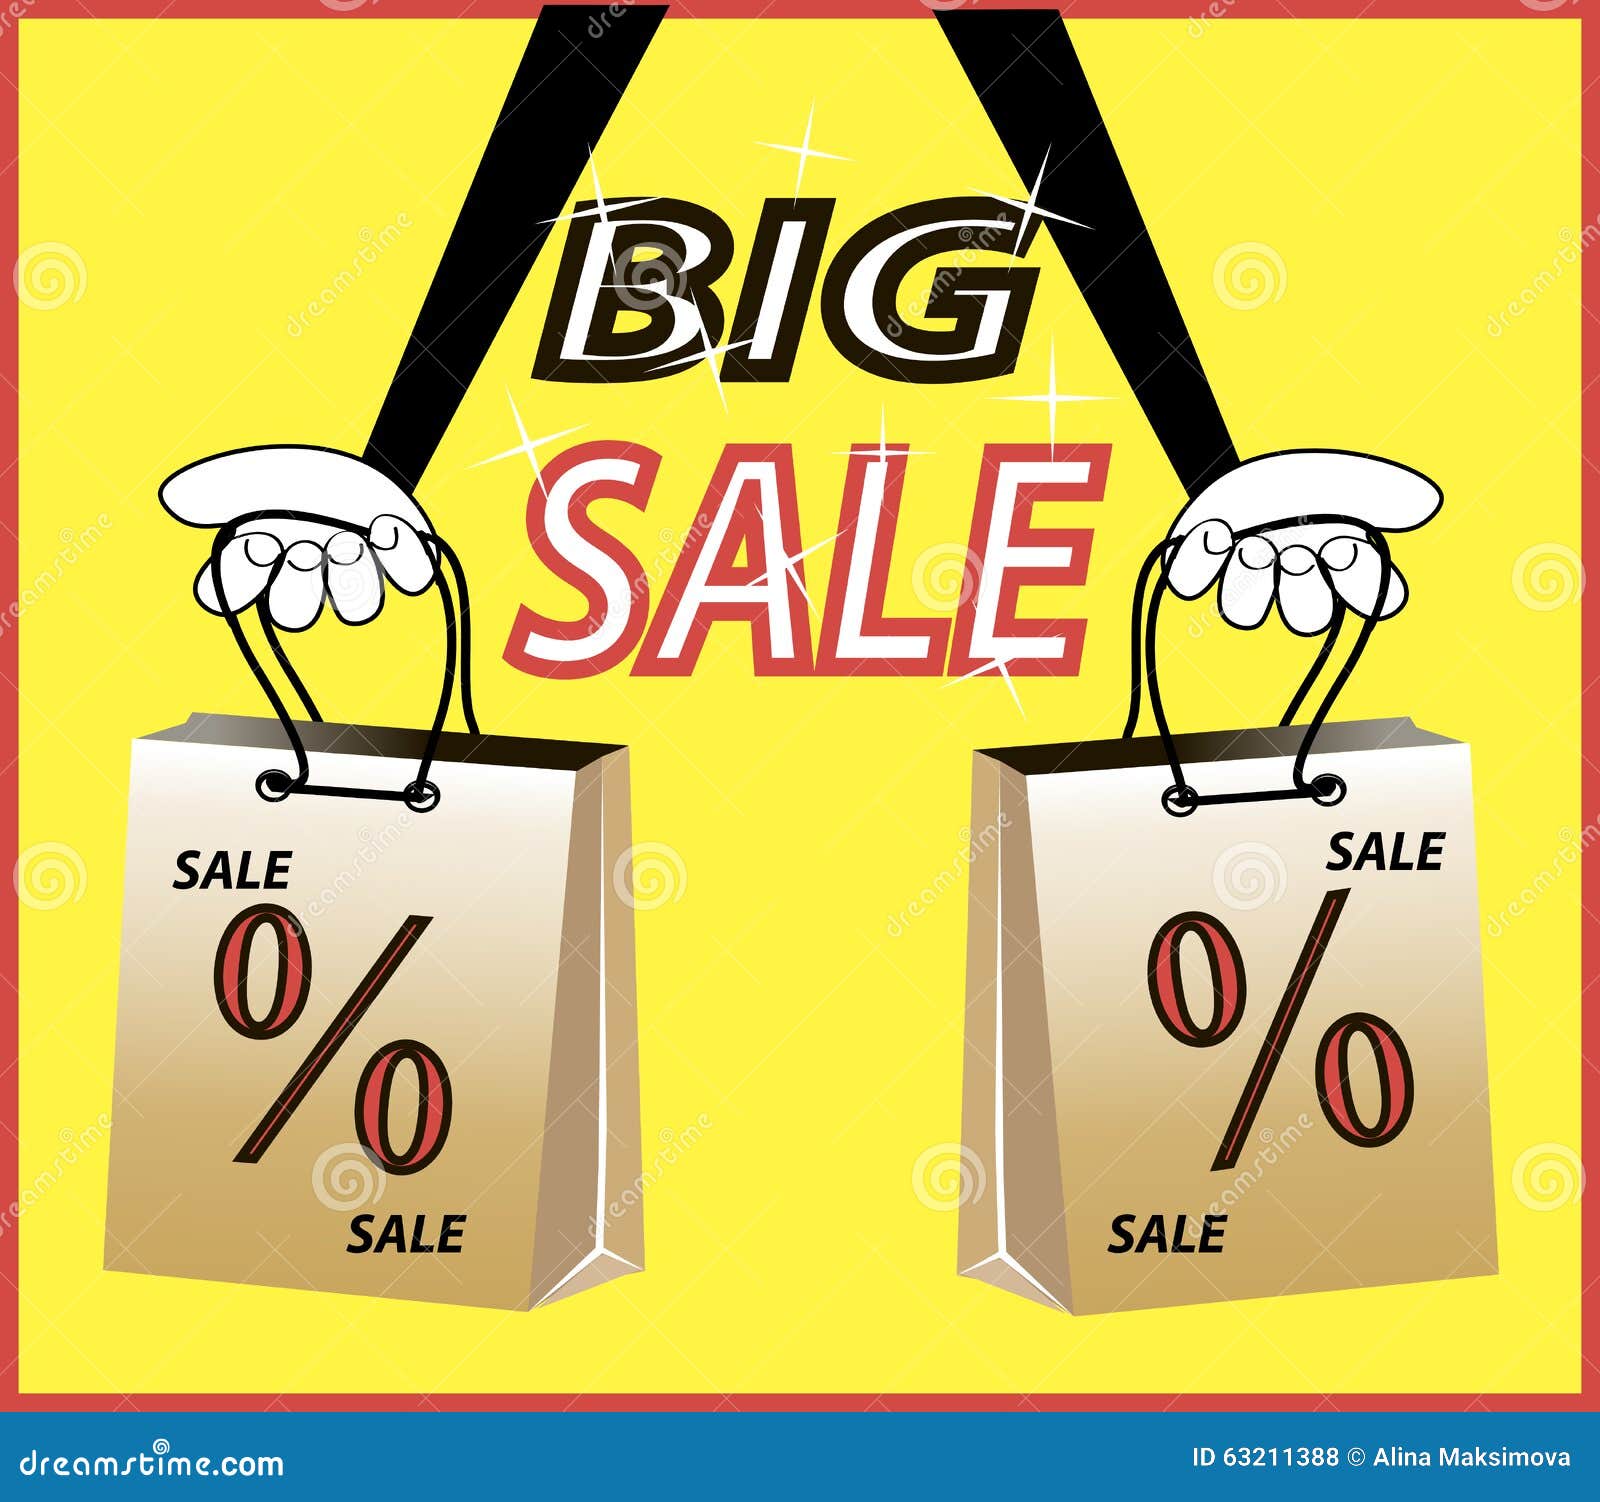 Big Sale! Caption Percent Discount, Shopping Bags Stock Vector - Image: 63211388